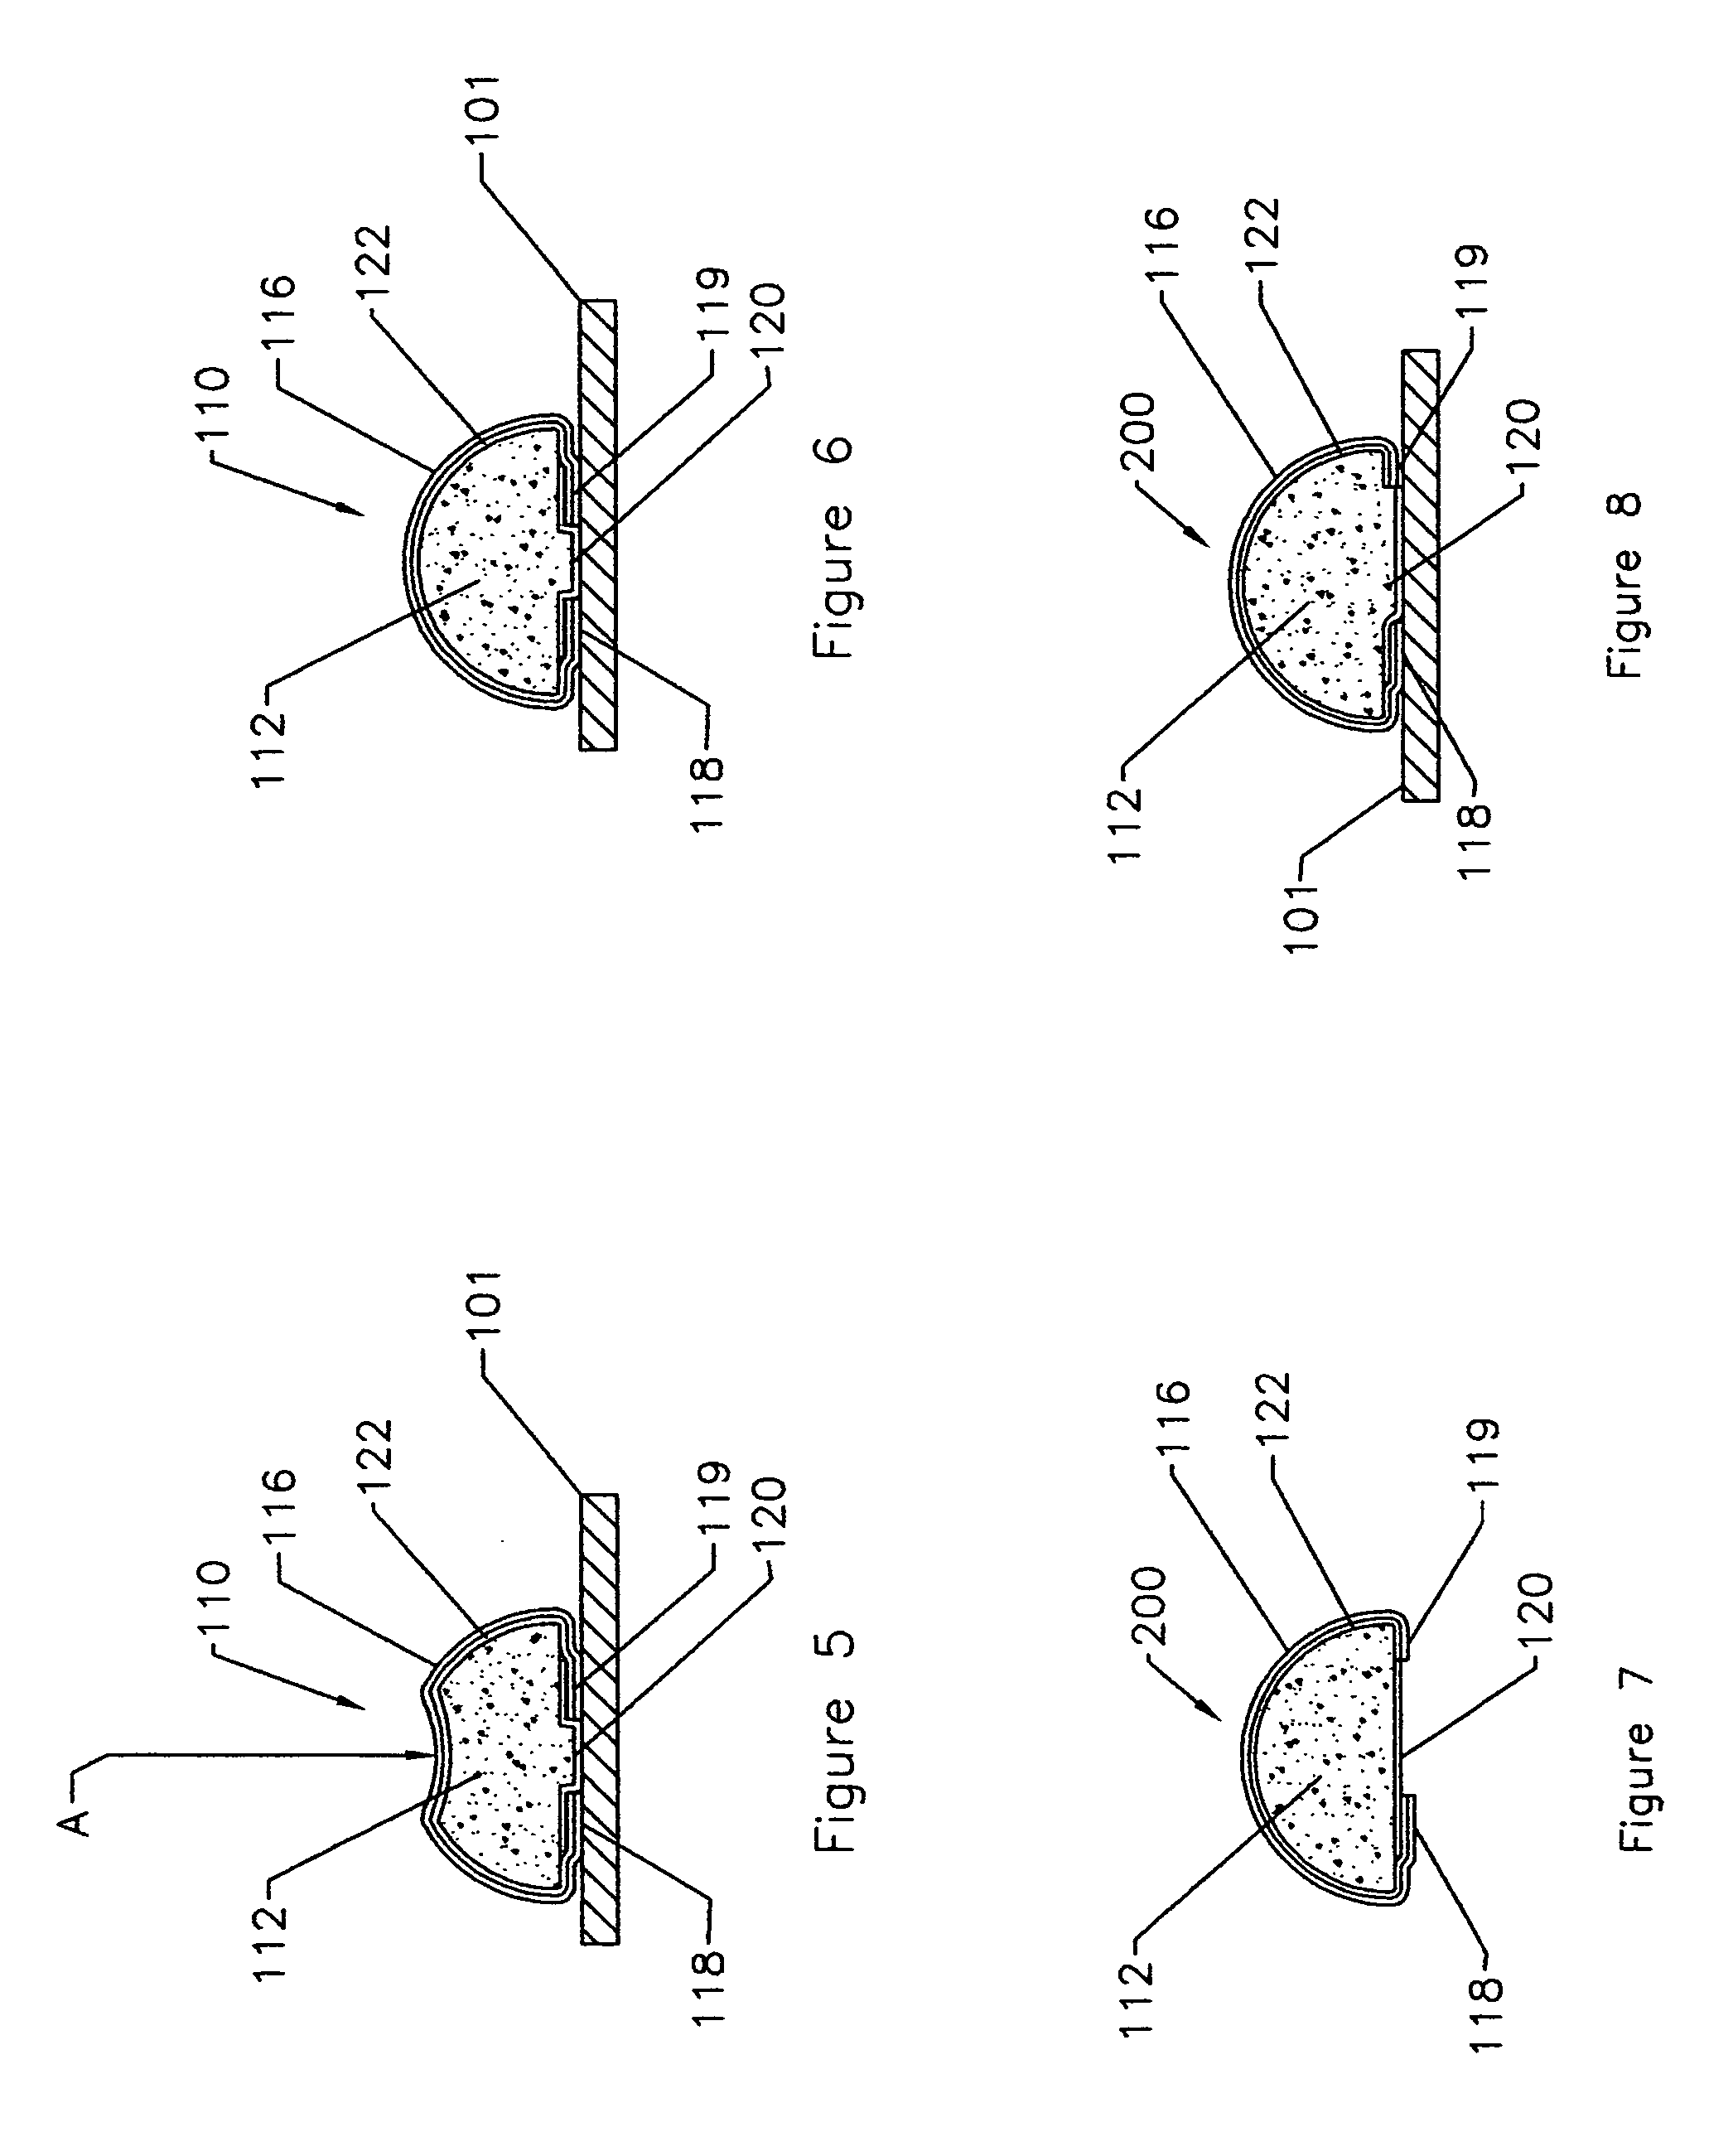 Electrically conductive gasket